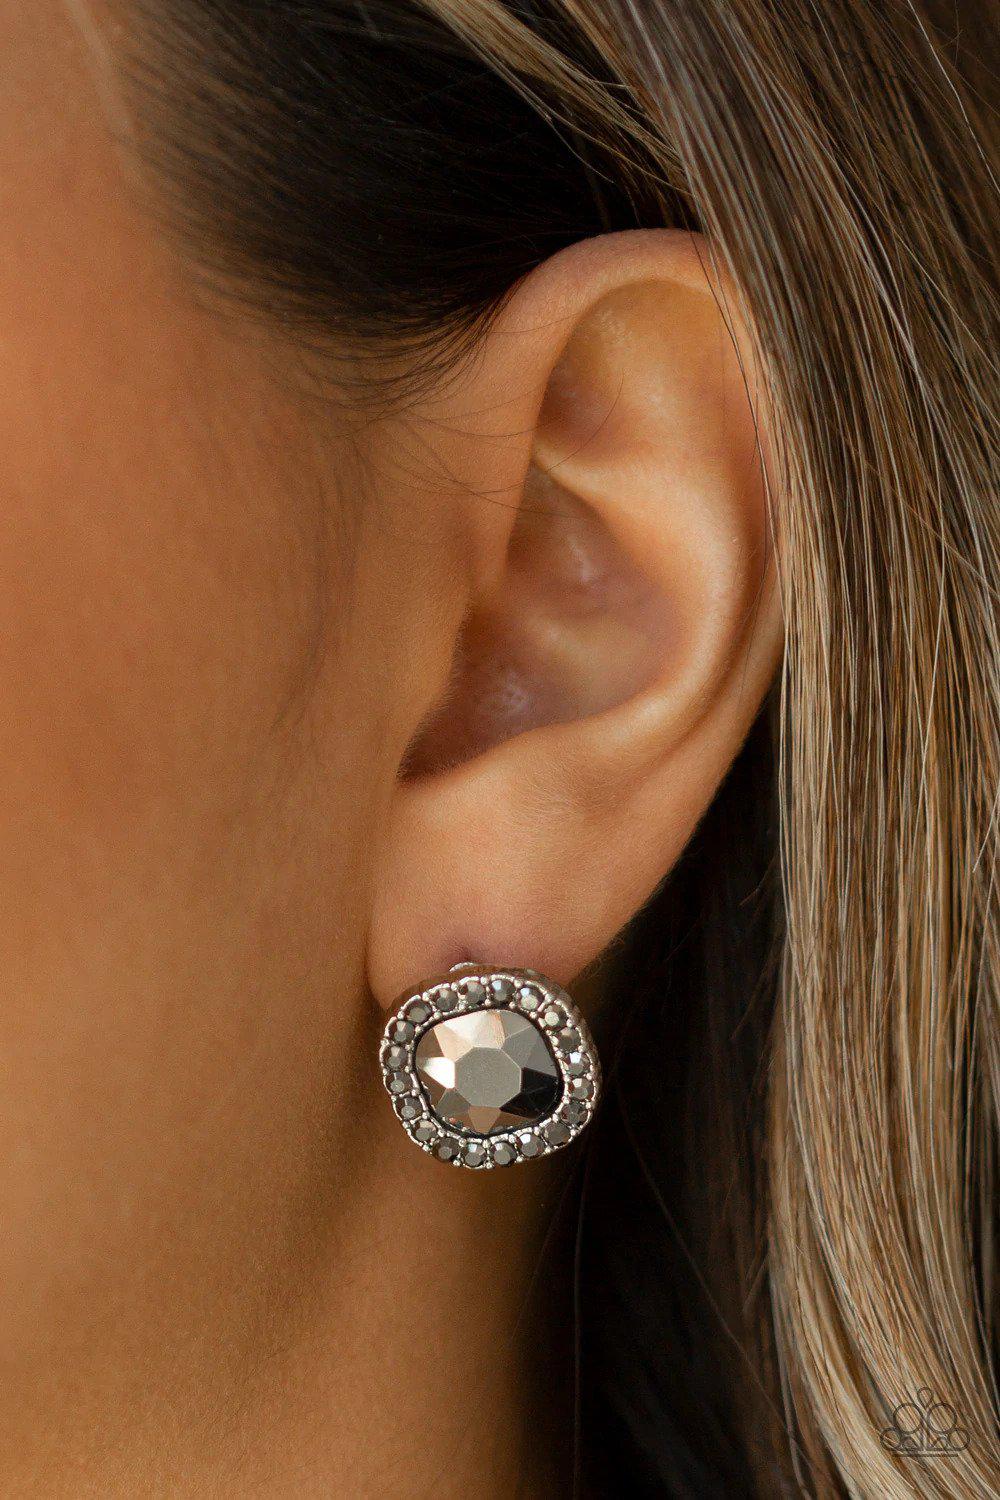 Bling Tastic! Silver Earrings - Paparazzi Accessories- lightbox - CarasShop.com - $5 Jewelry by Cara Jewels